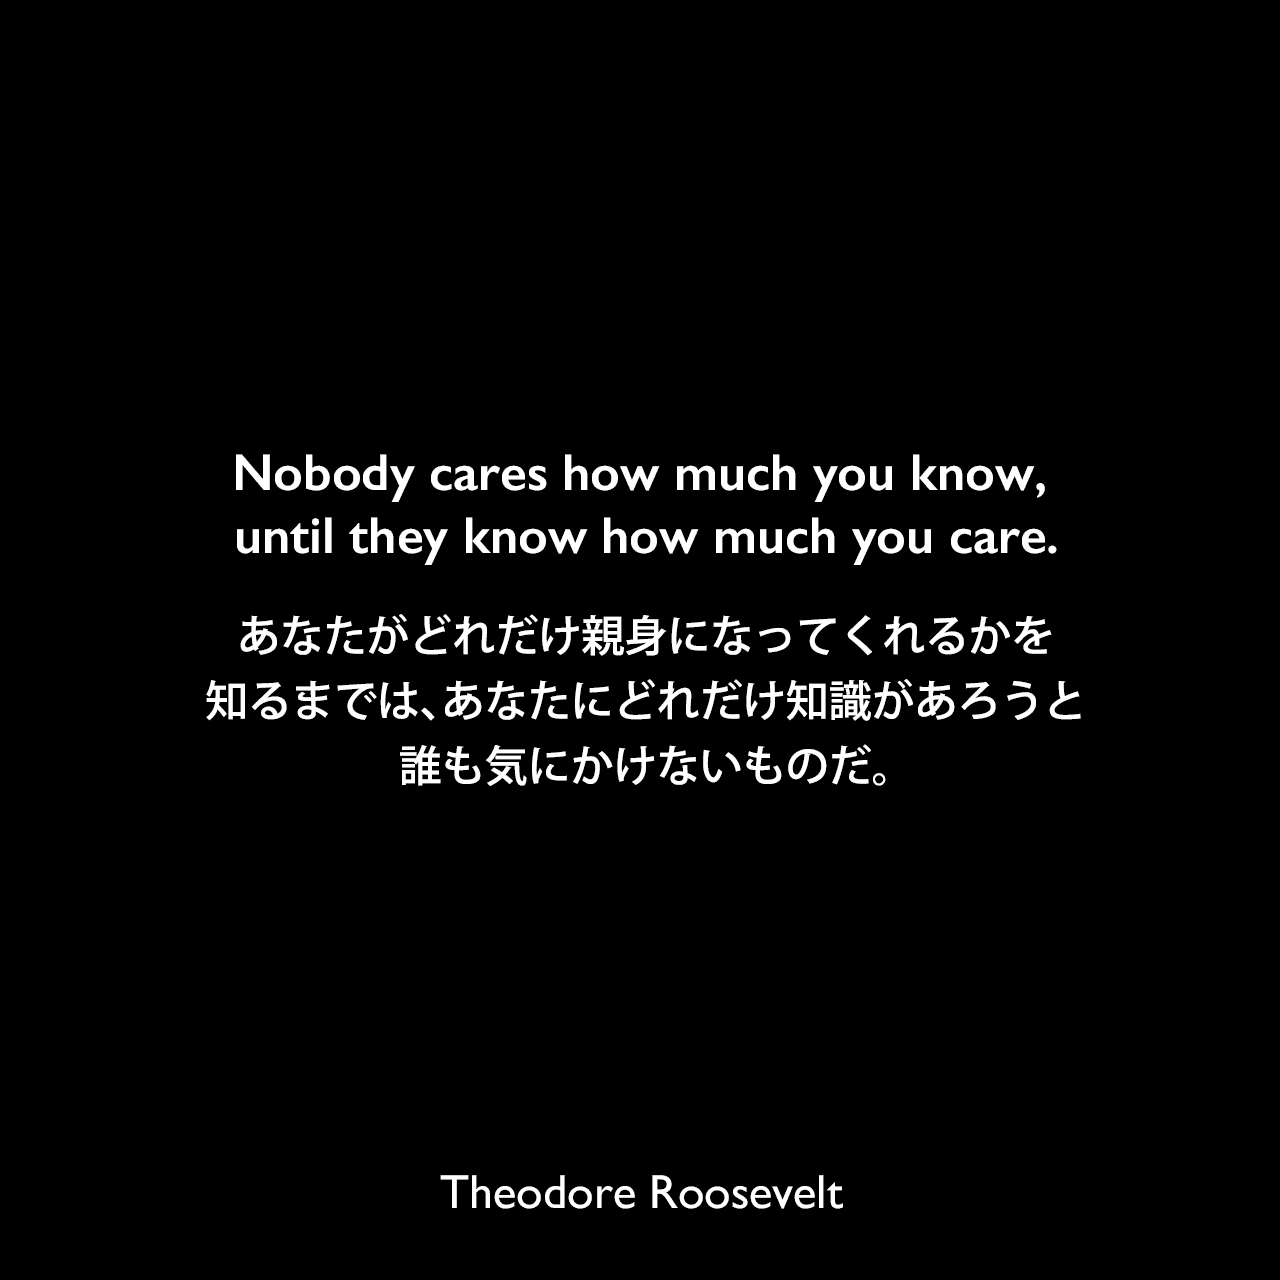 Nobody cares how much you know, until they know how much you care.あなたがどれだけ親身になってくれるかを知るまでは、あなたにどれだけ知識があろうと誰も気にかけないものだ。Theodore Roosevelt